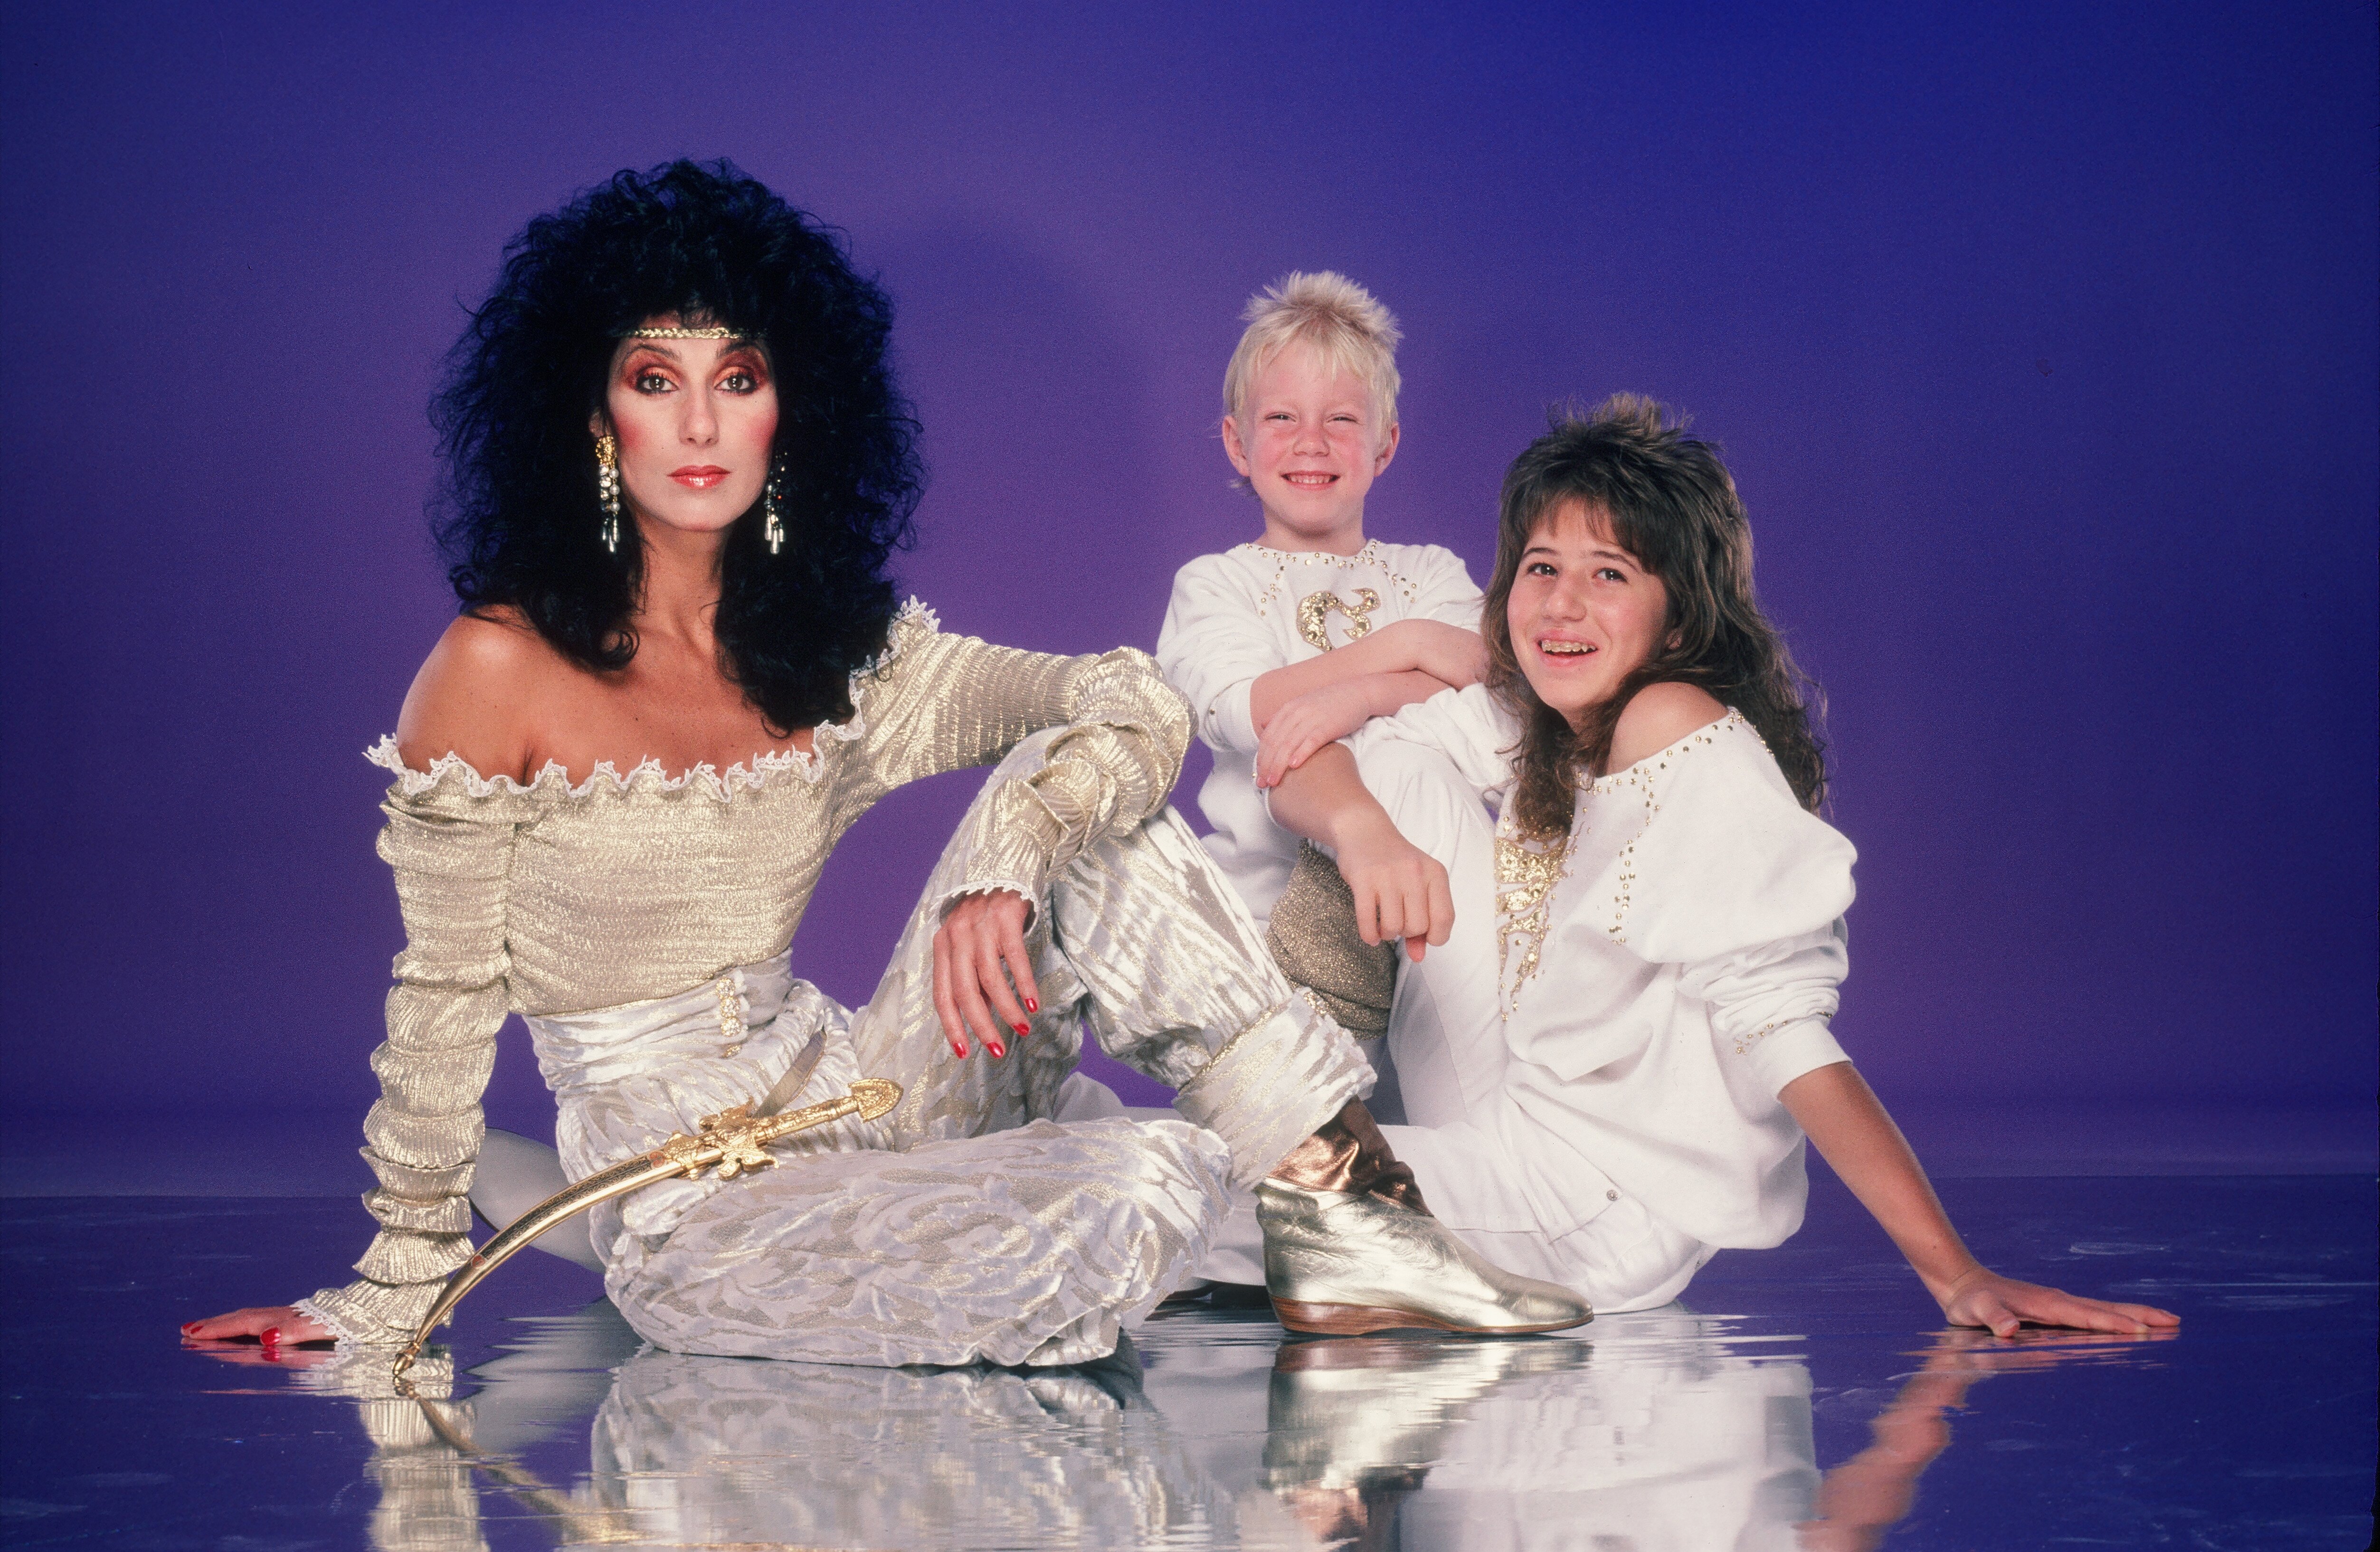 Cher, daughter Chastity Bono, and son Elijah Blue Allman pose for a photo in June 1981 in Los Angeles, California | Source: Getty Images